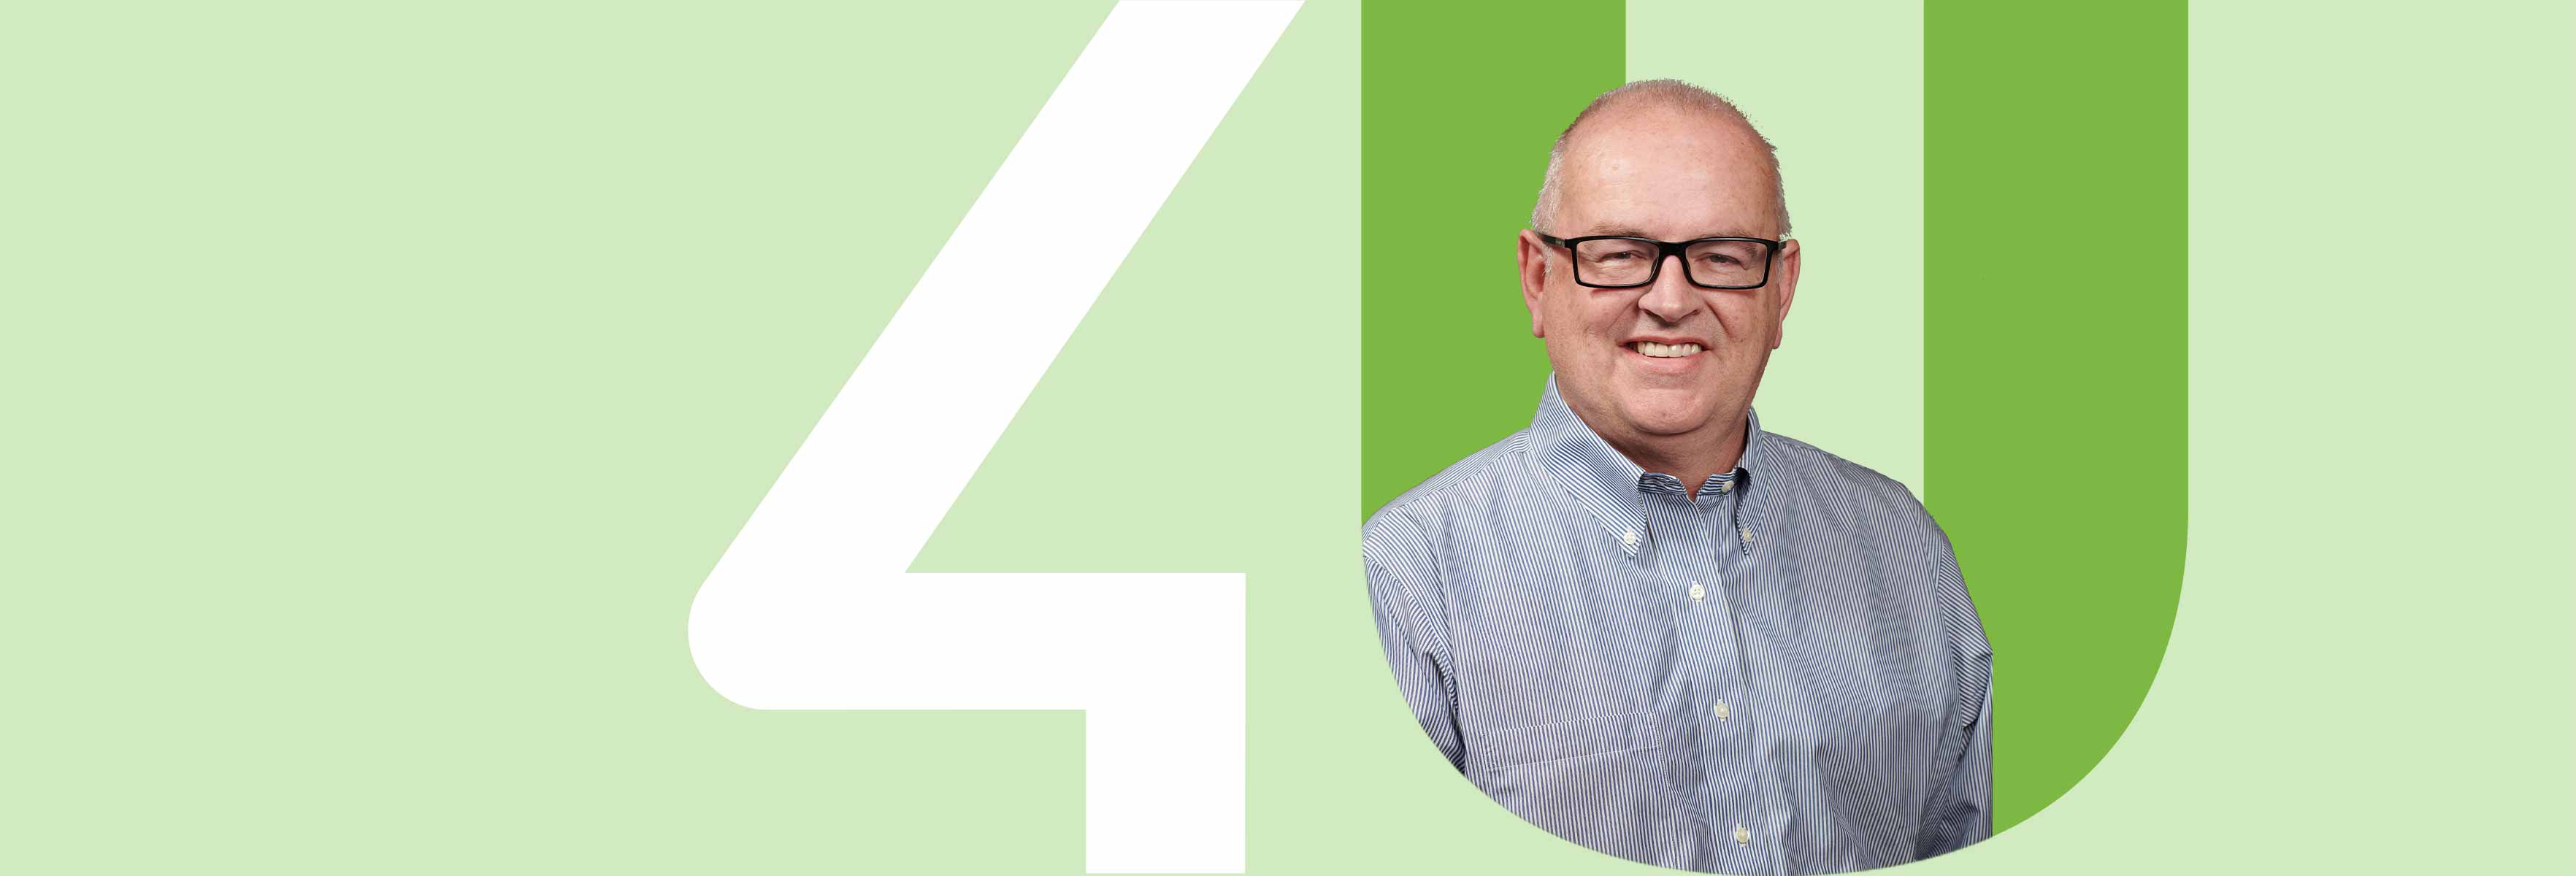 man with glasses inside the unit4 logo with green background